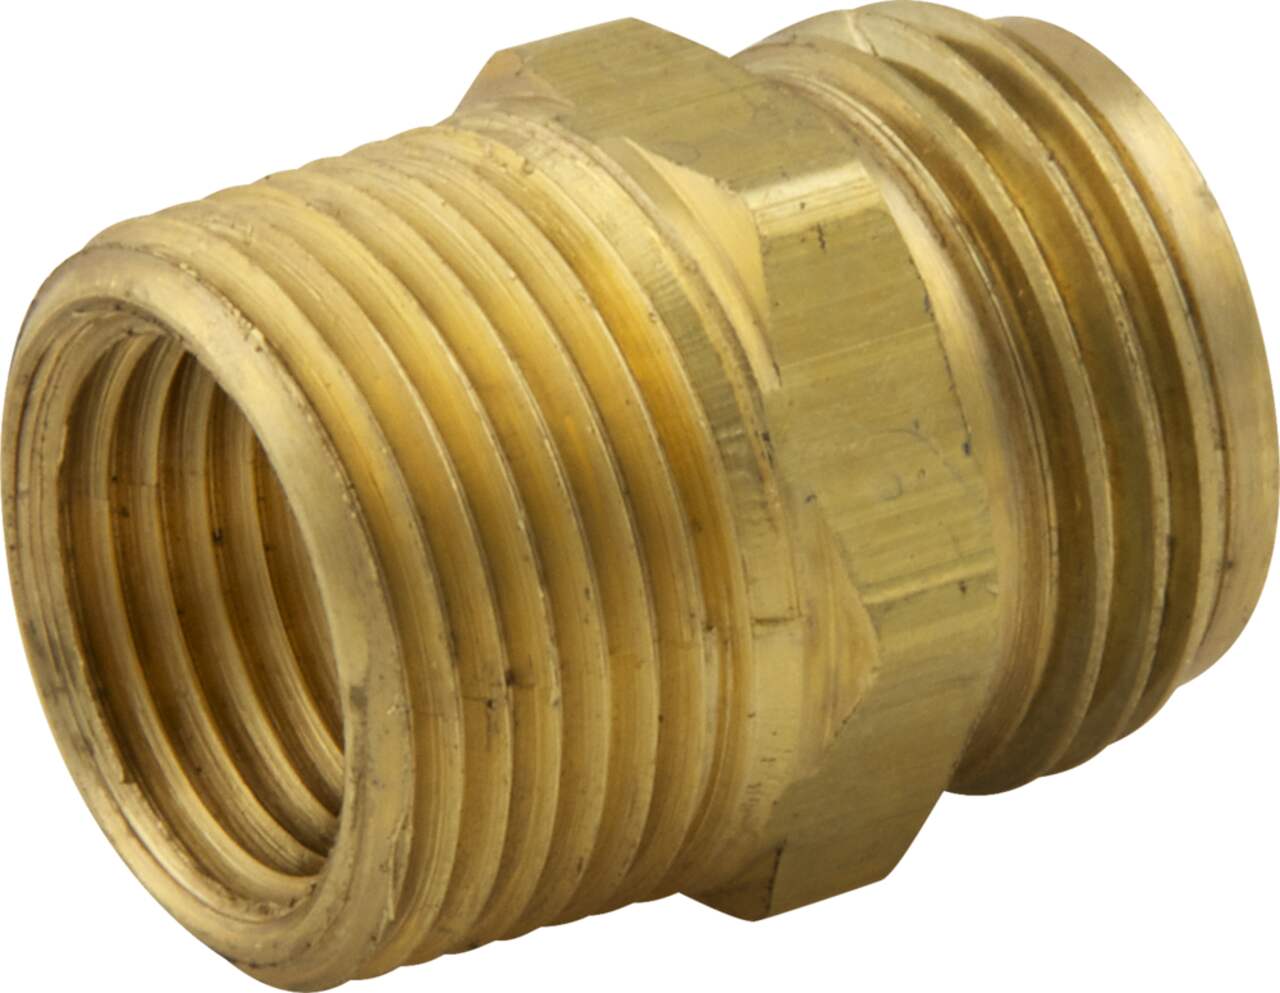 https://media-www.canadiantire.ca/product/fixing/plumbing/rough-plumbing/0630747/hose-adapter-3-4-male-thread-x-3-4-with-1-2-female-pipe-a5b0d2d6-0b20-49b3-a15c-99895a9eaa75.png?imdensity=1&imwidth=640&impolicy=mZoom